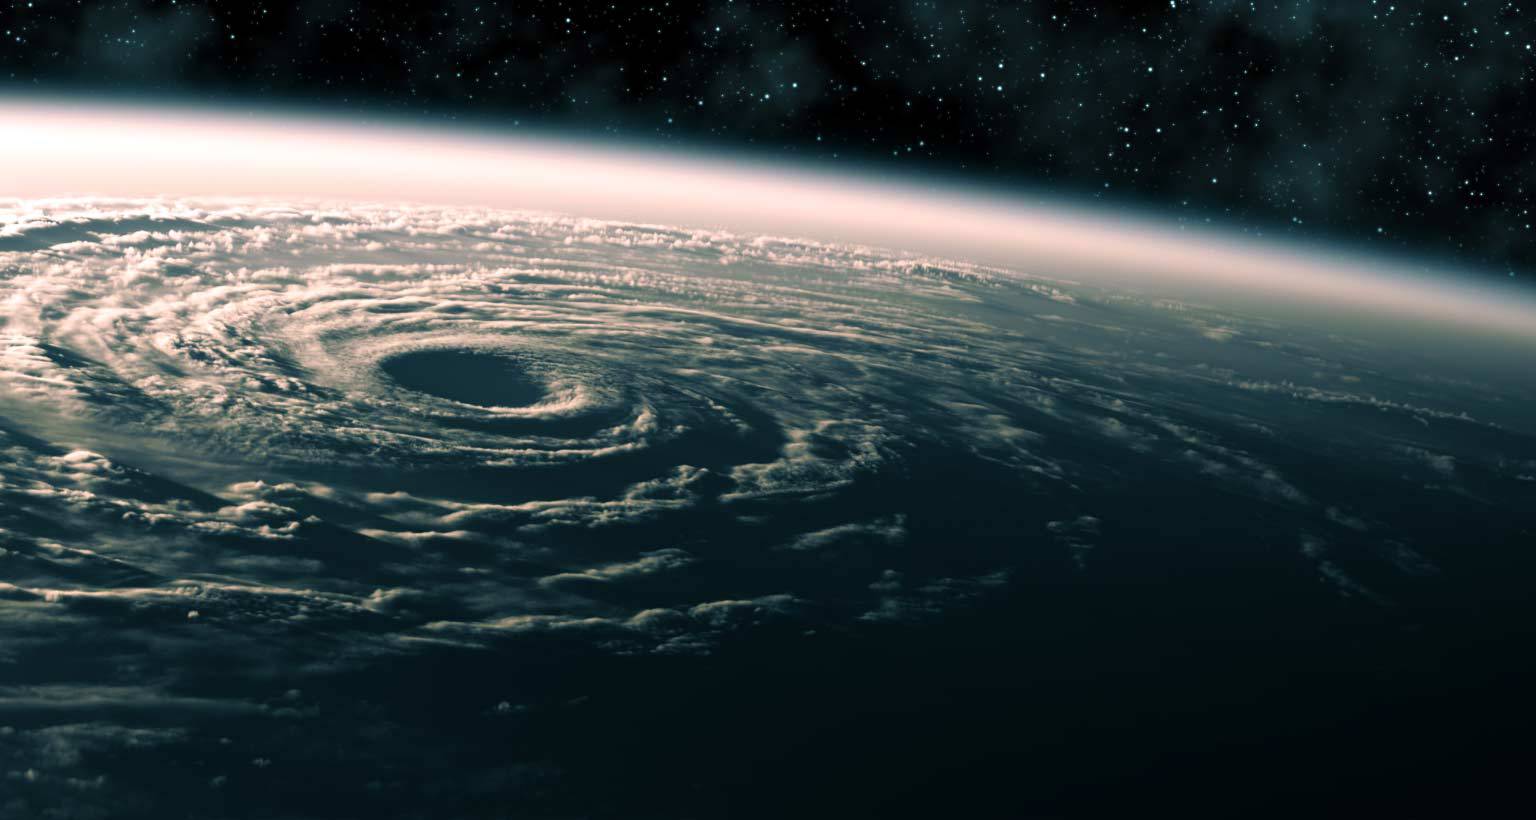 view of hurricane natural disaster from space